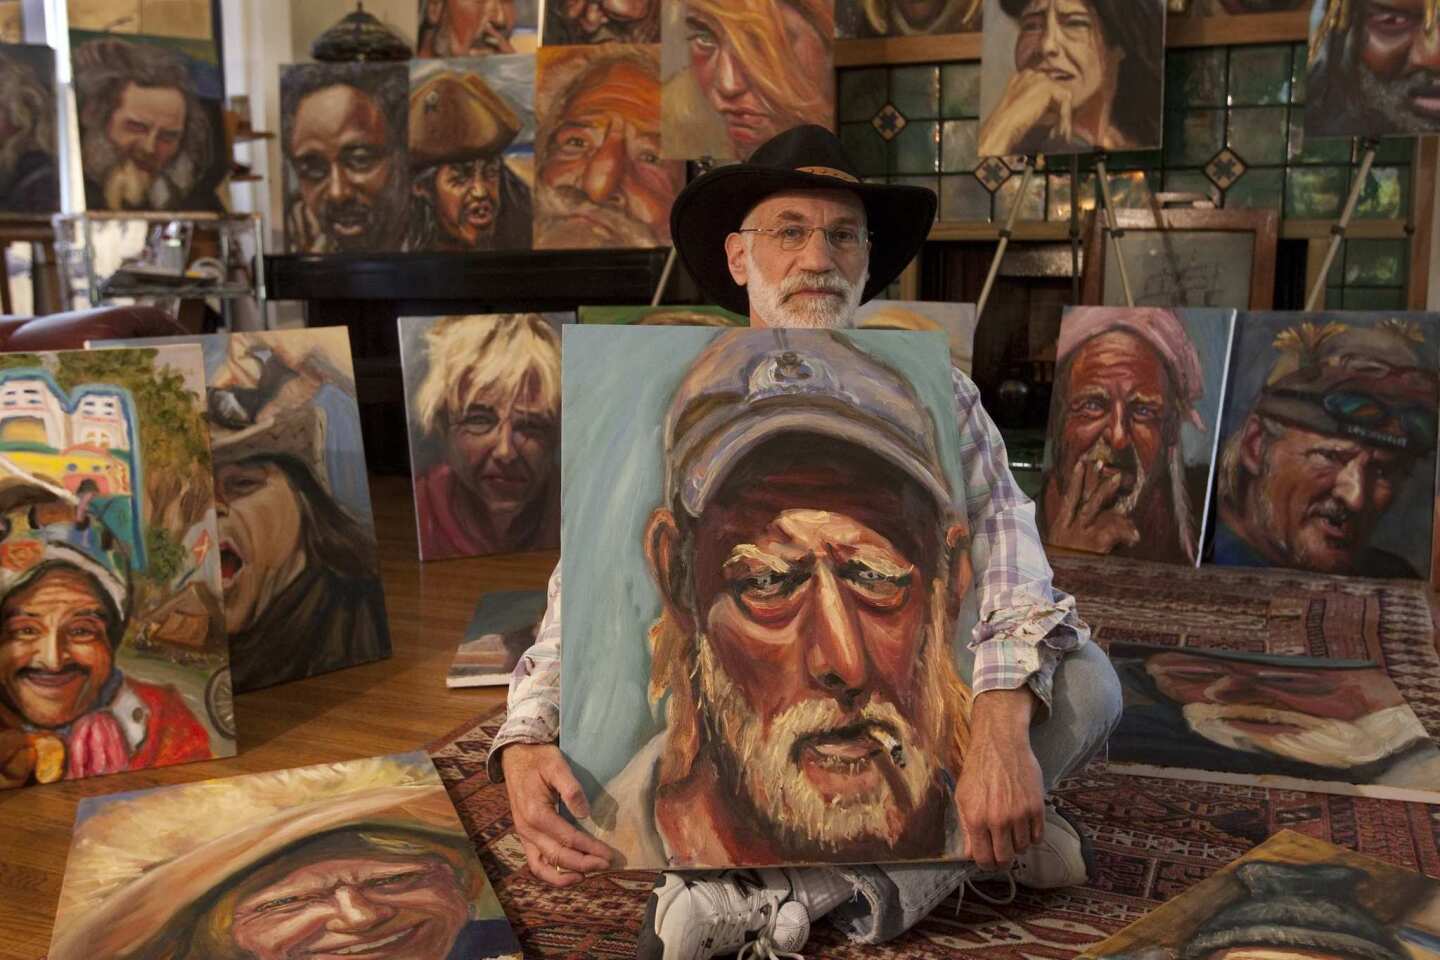 Stuart Perlman, shown surrounded by his portraits of homeless people he meets on the Venice Beach boardwalk, is a Santa Monica psychologist who has studied trauma survivors. For the last two years he has interviewed and painted the portraits of homeless people in Venice Beach. Here Perlman holds a portrait of Daniel, a former project leader at an architectural firm whose life spun out of control a dozen years ago after a drunk driver ran a red light and crashed into the family vehicle, killing his wife and children. Daniel was not in the vehicle.